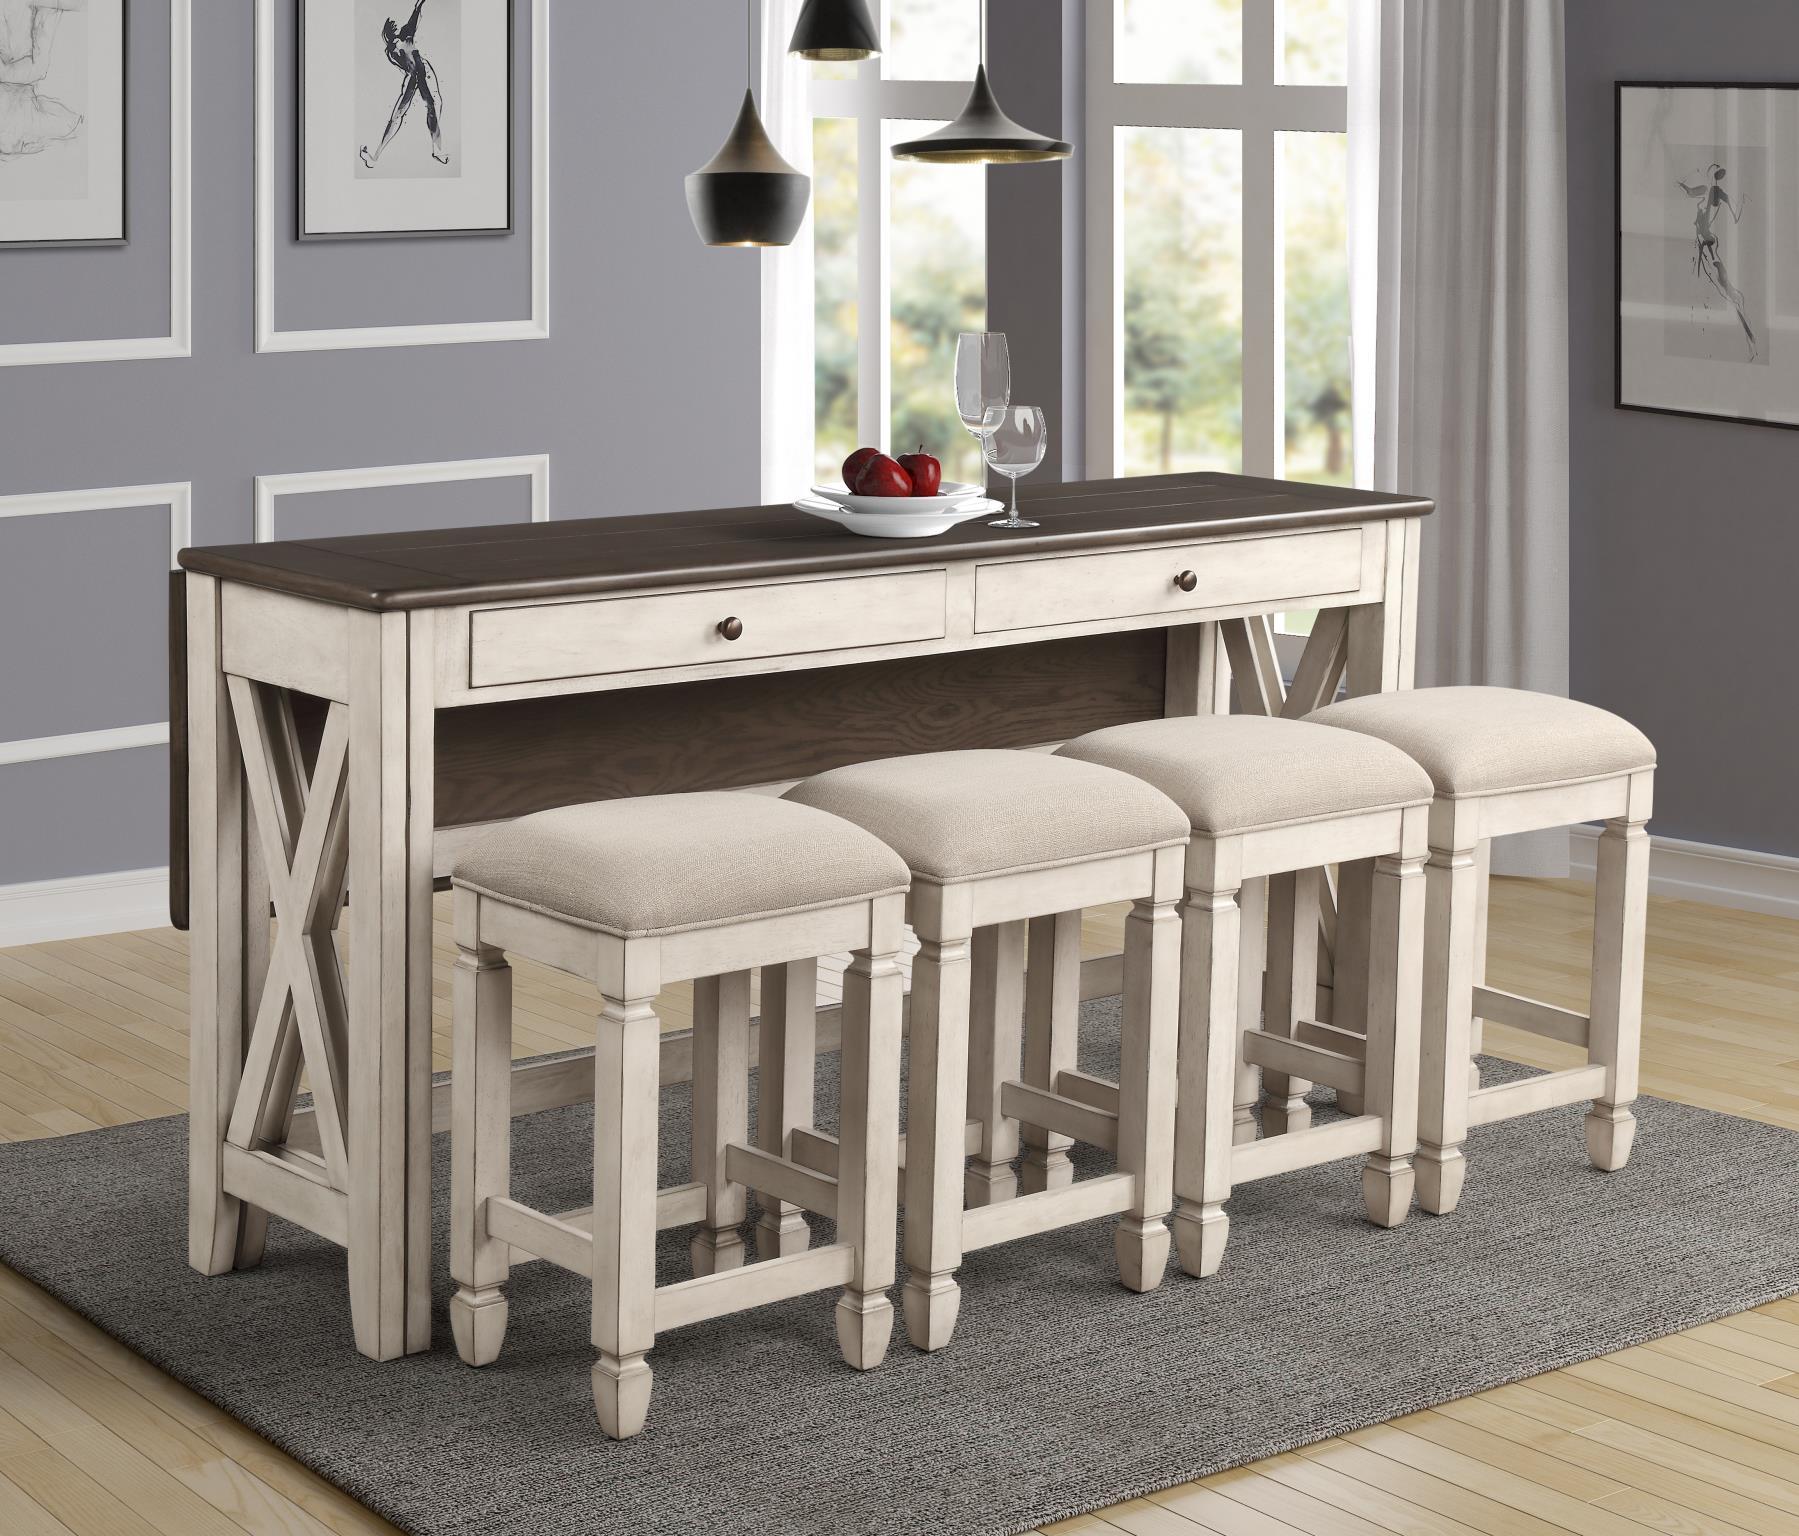 Transitional, Farmhouse Counter Table Set WAVERLY 5908-532 5908-532 in Brown, Beige Fabric